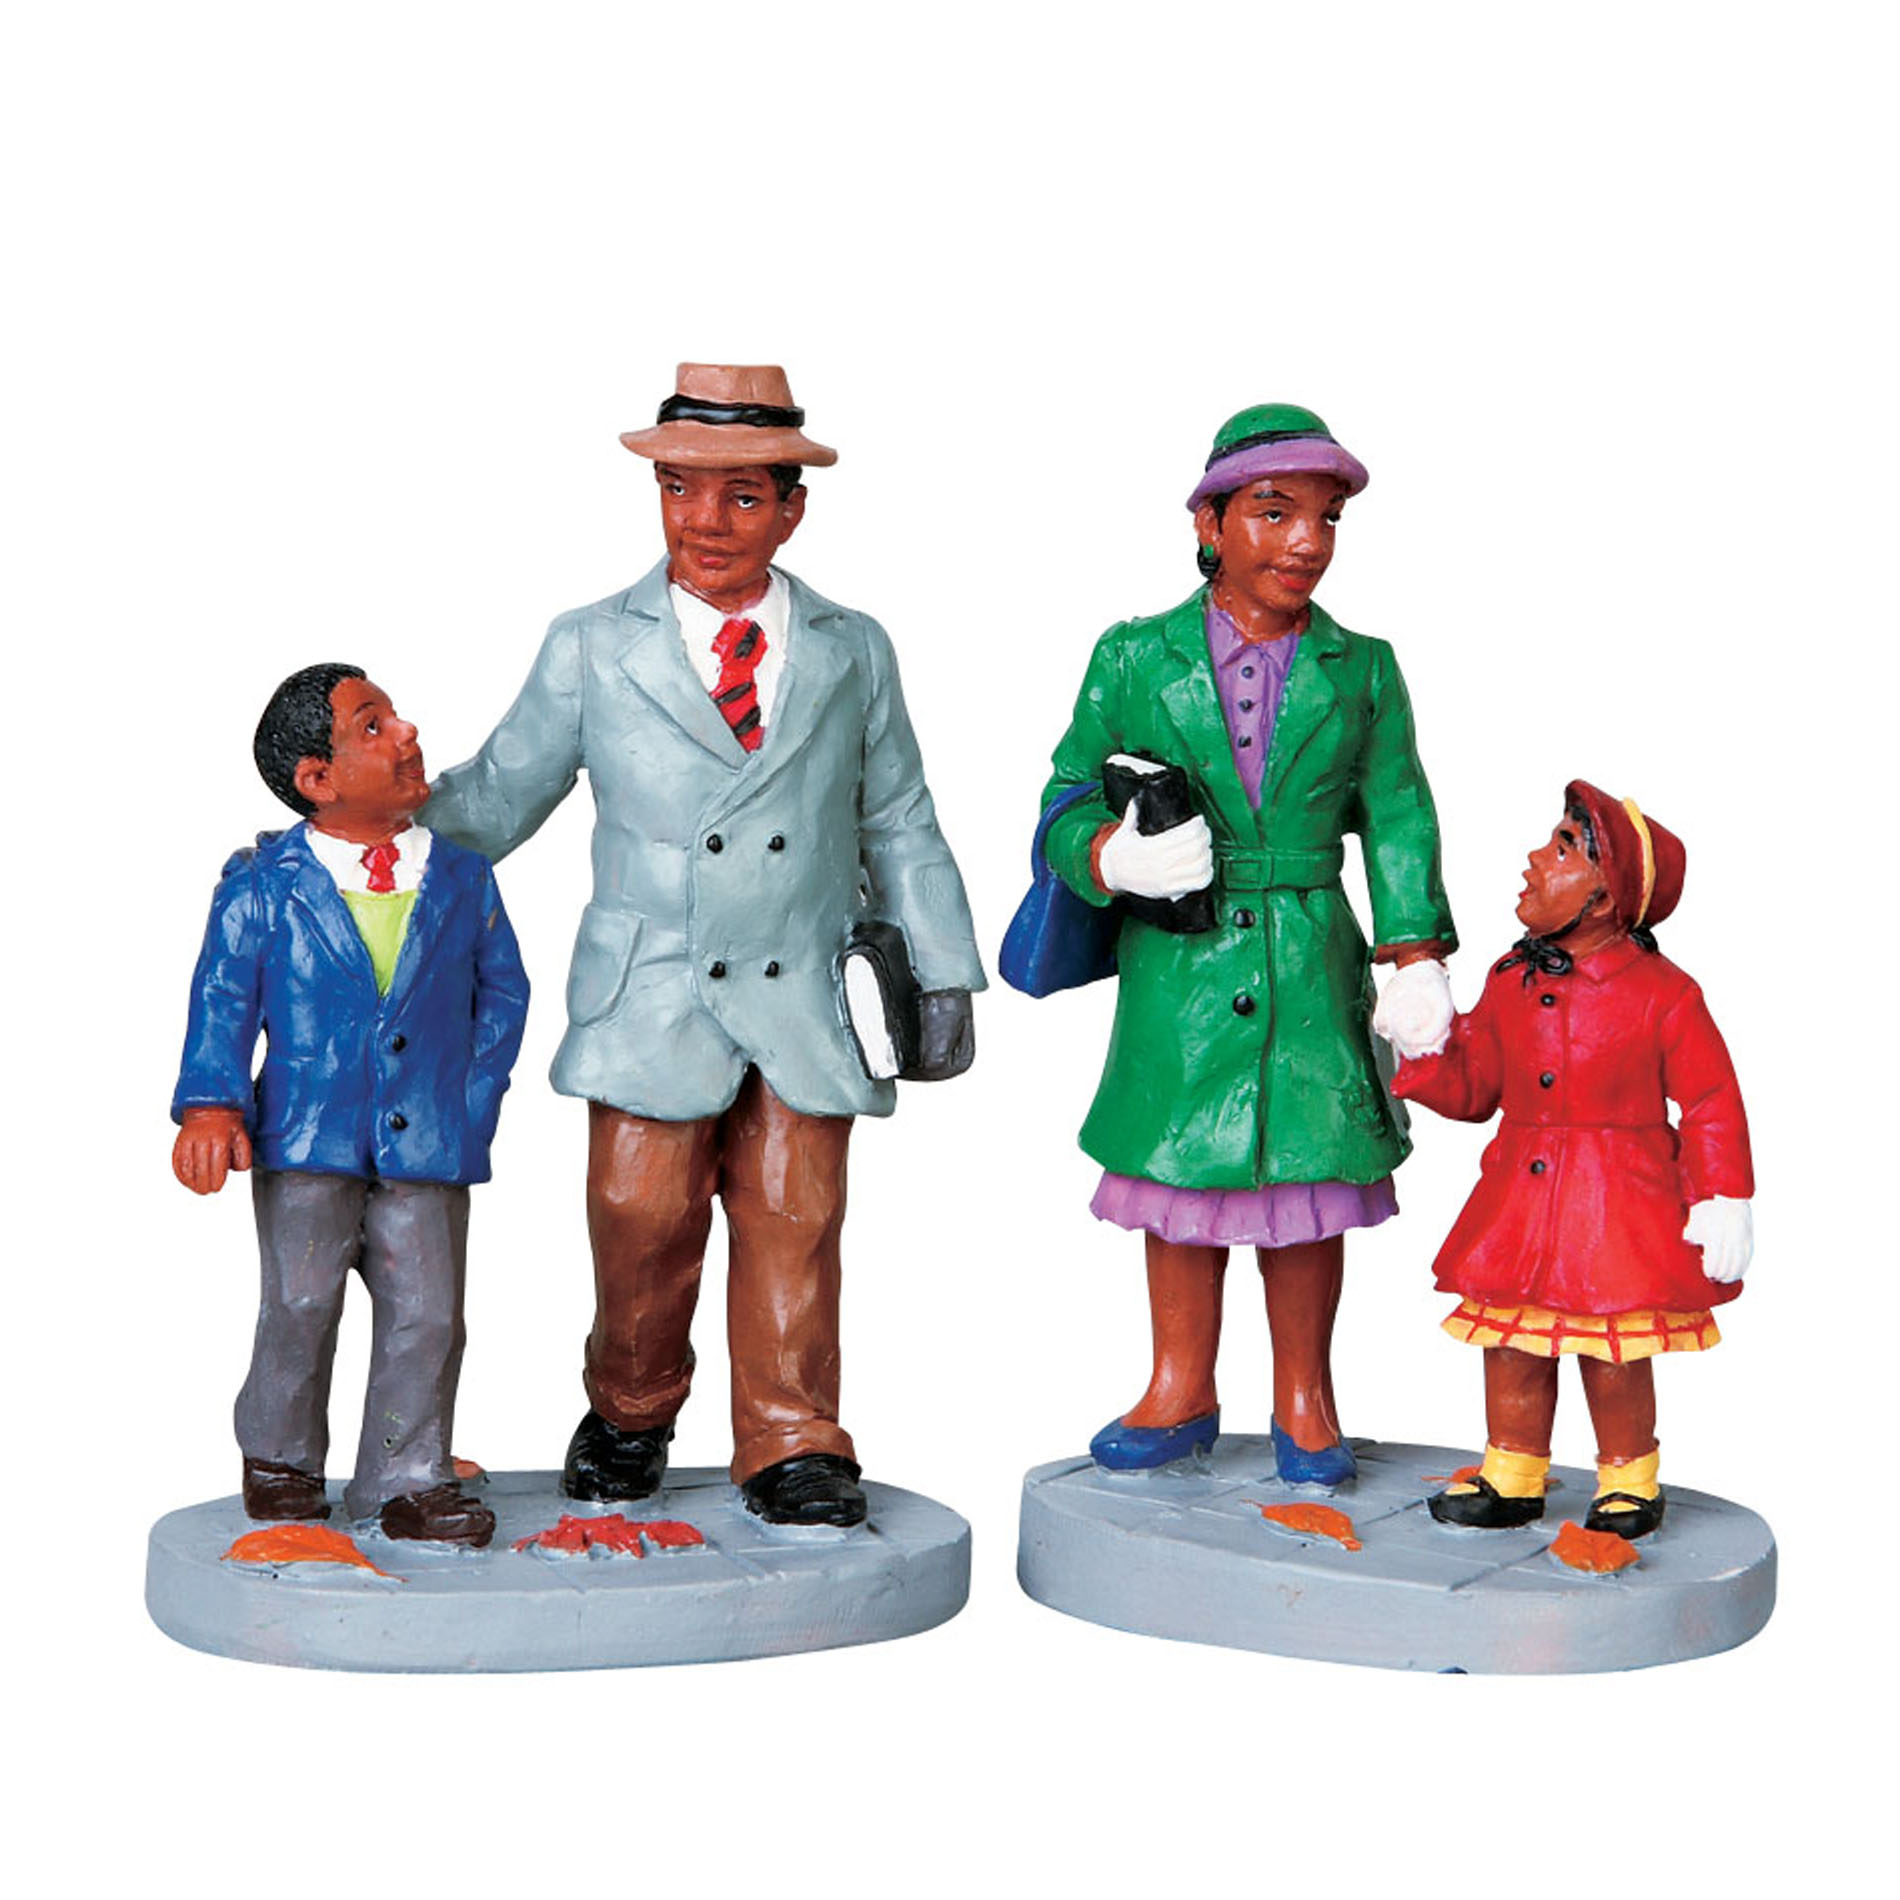 Lemax Village Collection Christmas Village Figurine, Going To Church, 2 set